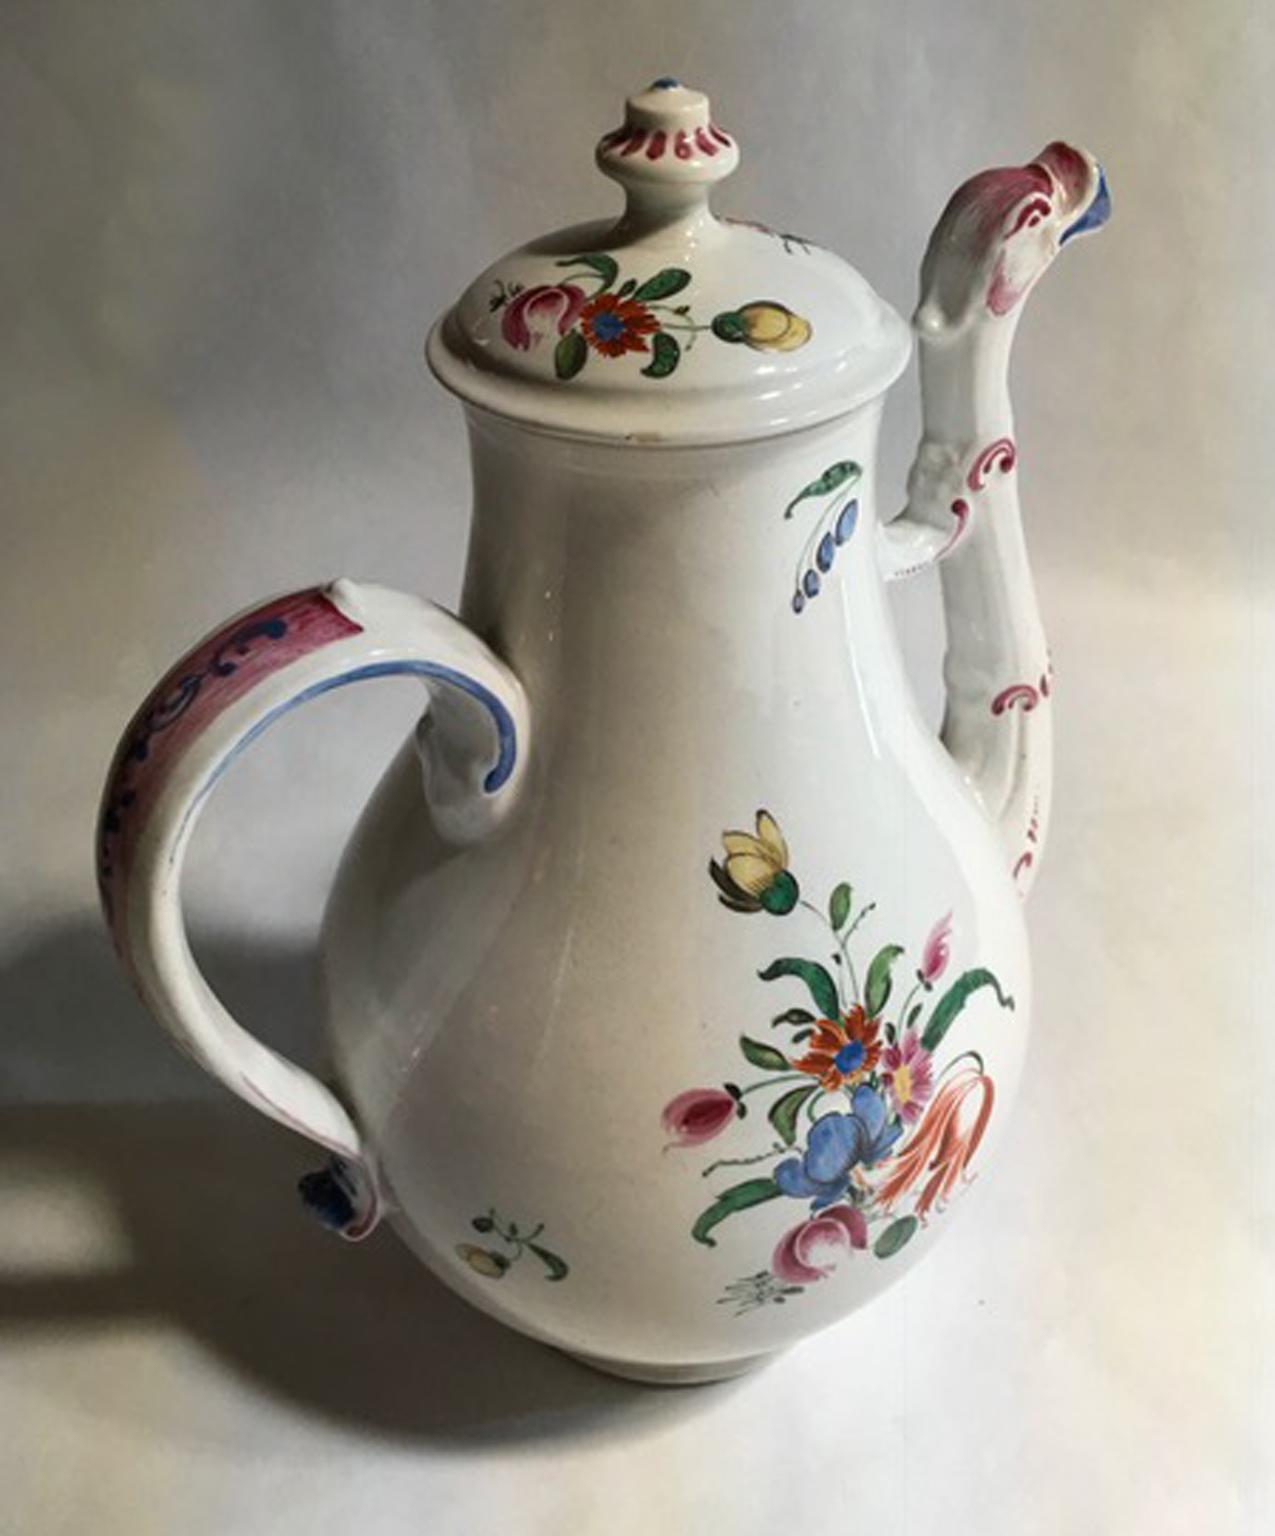 Hand-Crafted Italy Richard Ginori Porcelain Coffee Pot Multi-Color Country Flowers Decor